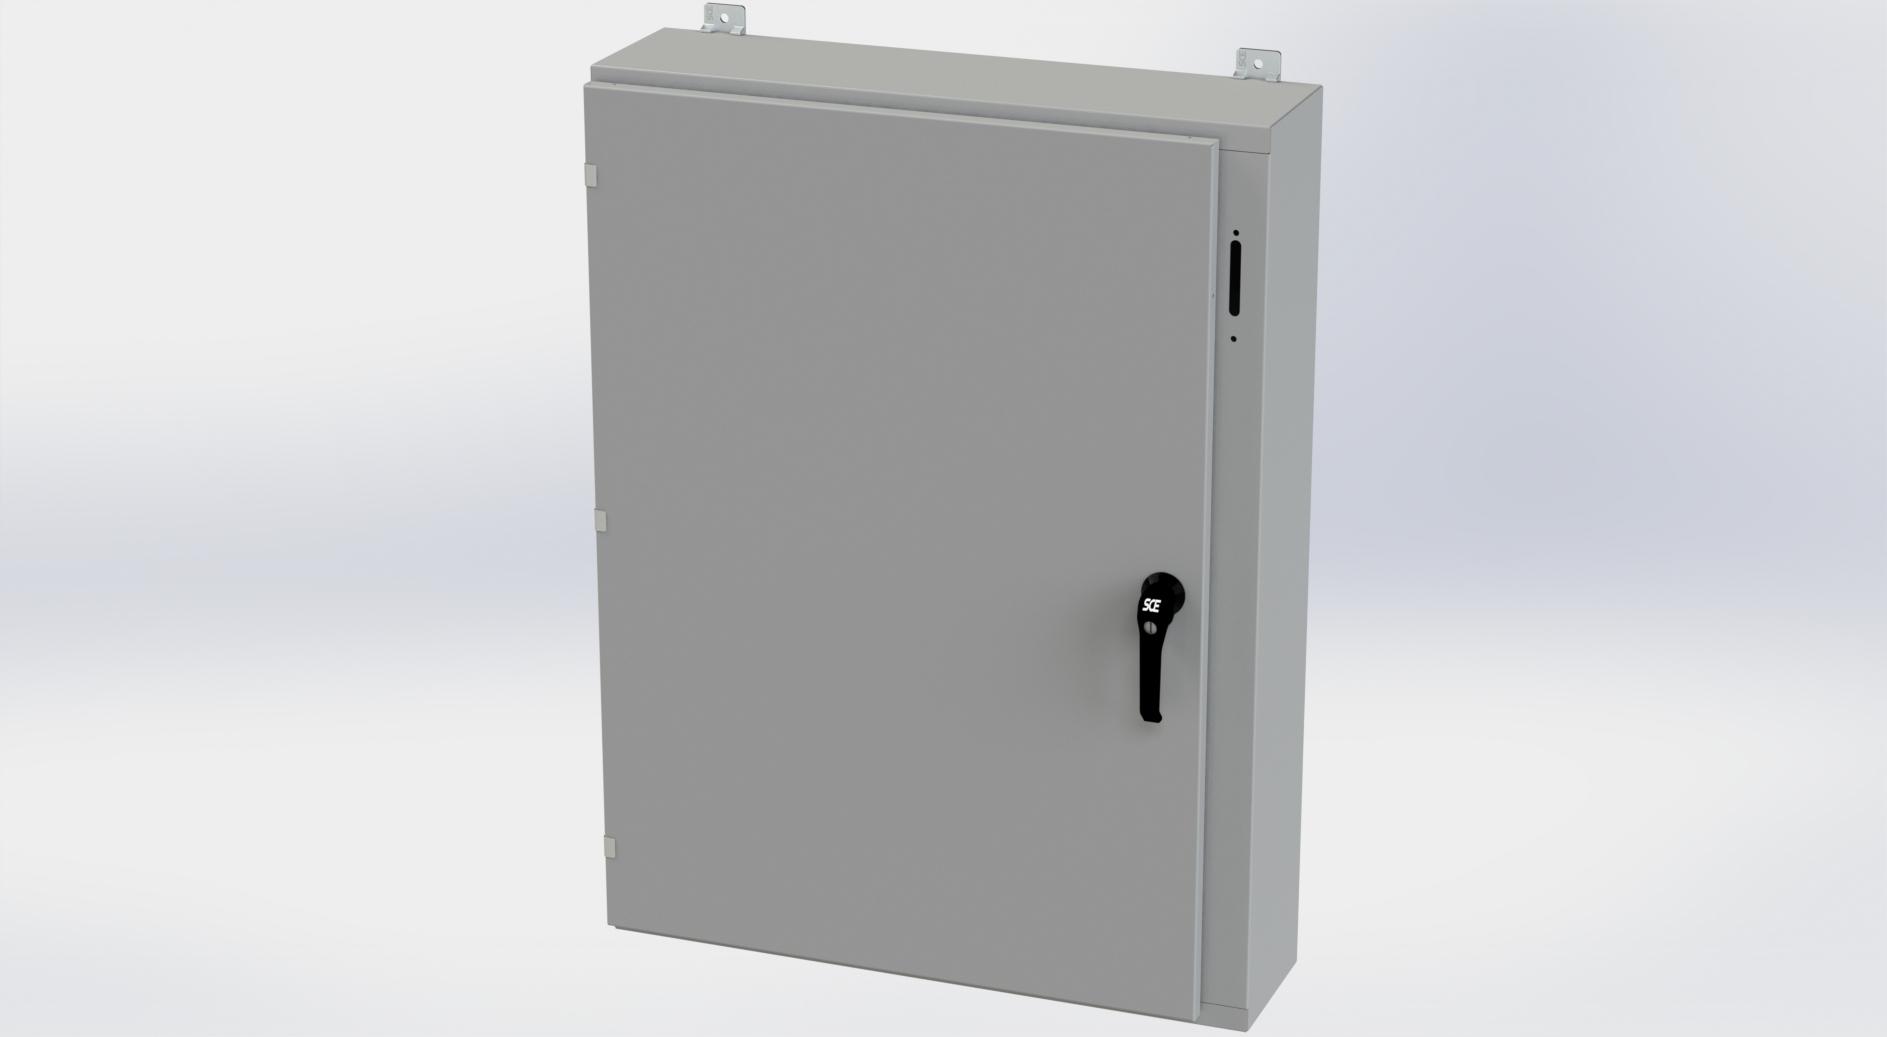 Saginaw Control SCE-42SA3208LPPL Obselete Use SCE-42XEL3108LP, Height:42.00", Width:31.38", Depth:8.00", ANSI-61 gray powder coating inside and out. Optional sub-panels are powder coated white.